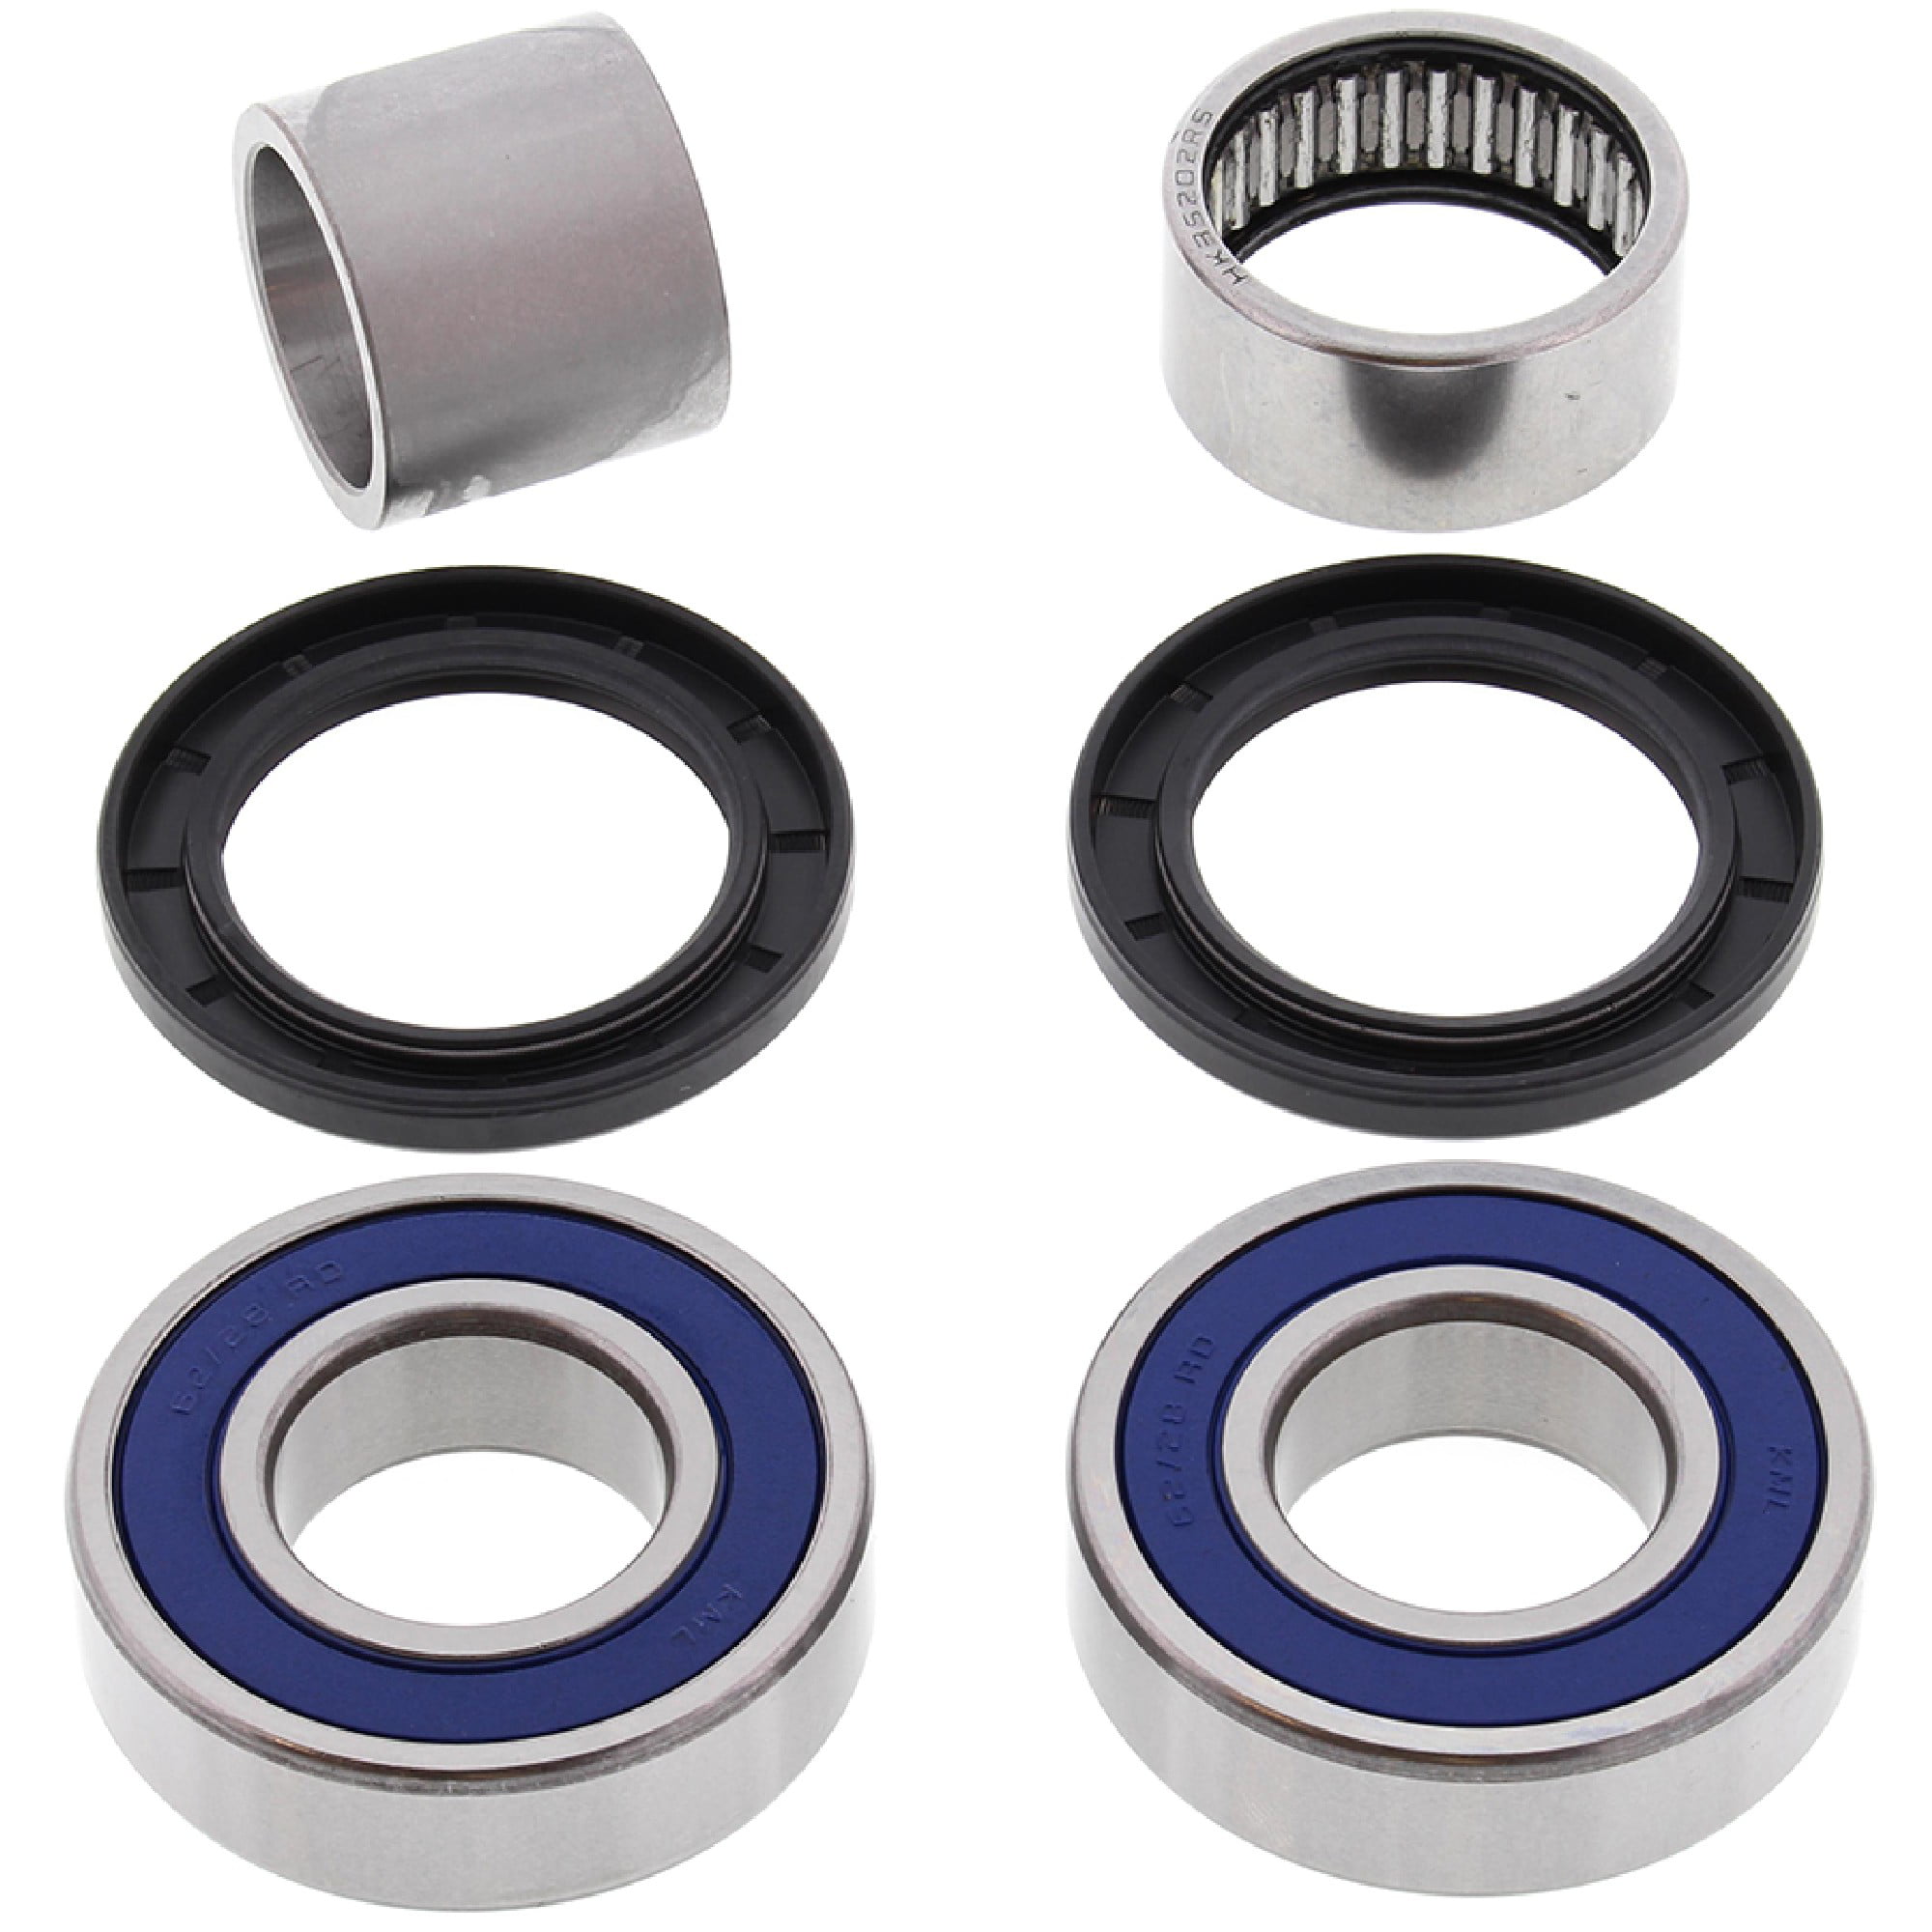 Bearing Kit of Steering and Anti Dust All Balls Yamaha 600 YZF R6 2005 for sale online 